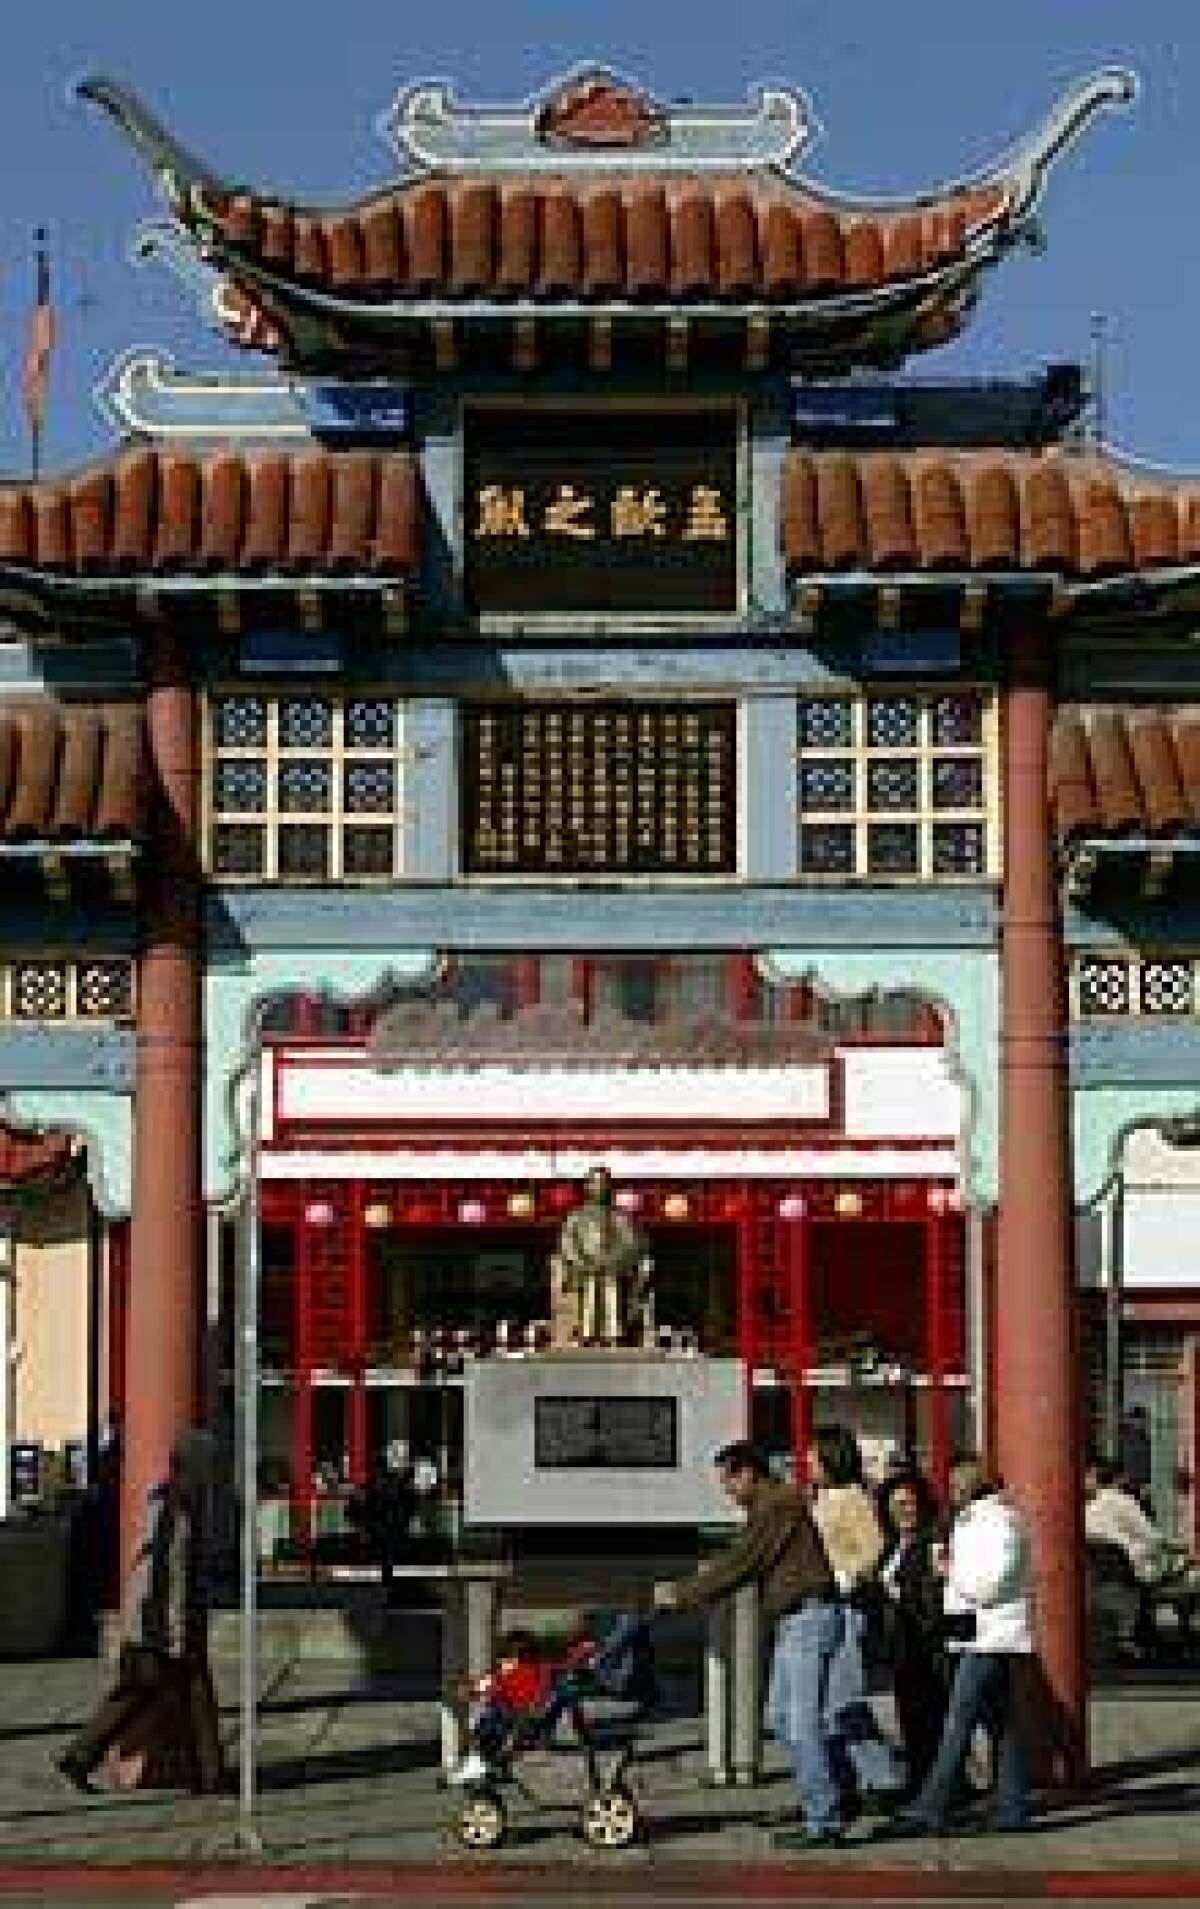 The gateway on Broadway marks the historic area of Chinatown.